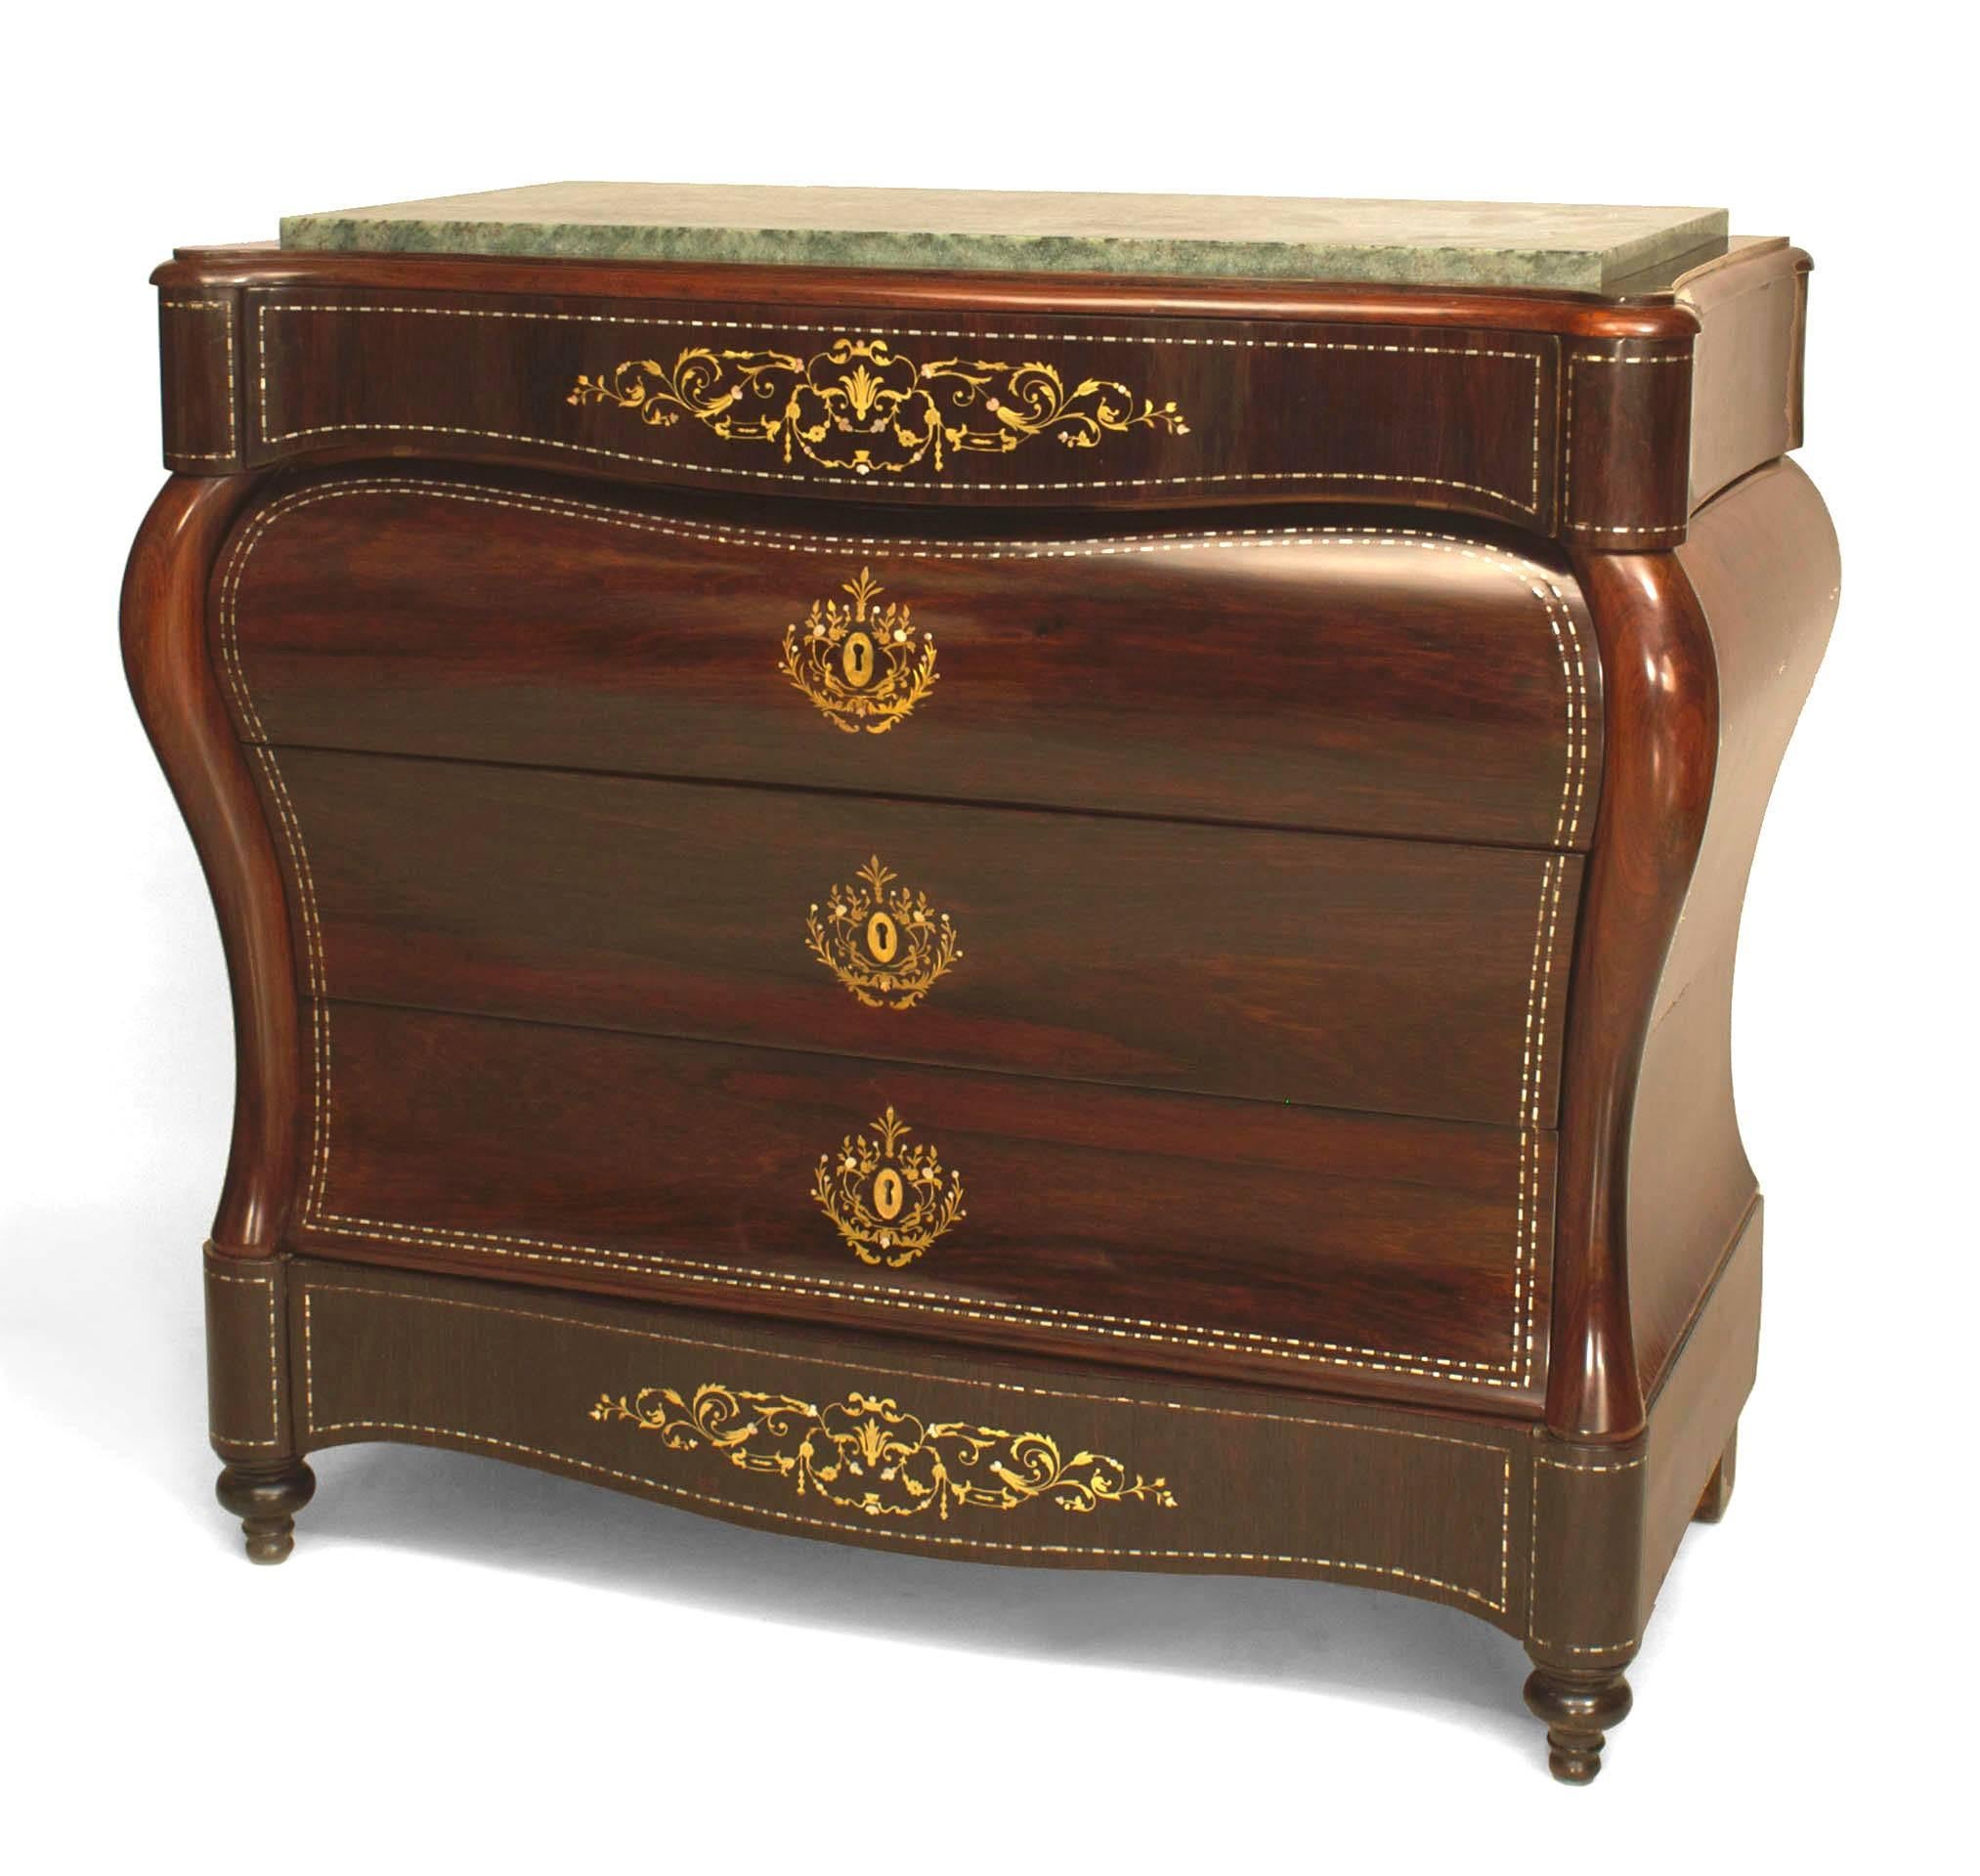 Pair of Continental (circa 1850s) Spanish rosewood 5 drawer bombe shaped commodes with mother of pearl, pewter, and brass inlay with marble tops (PRICED AS Pair).
